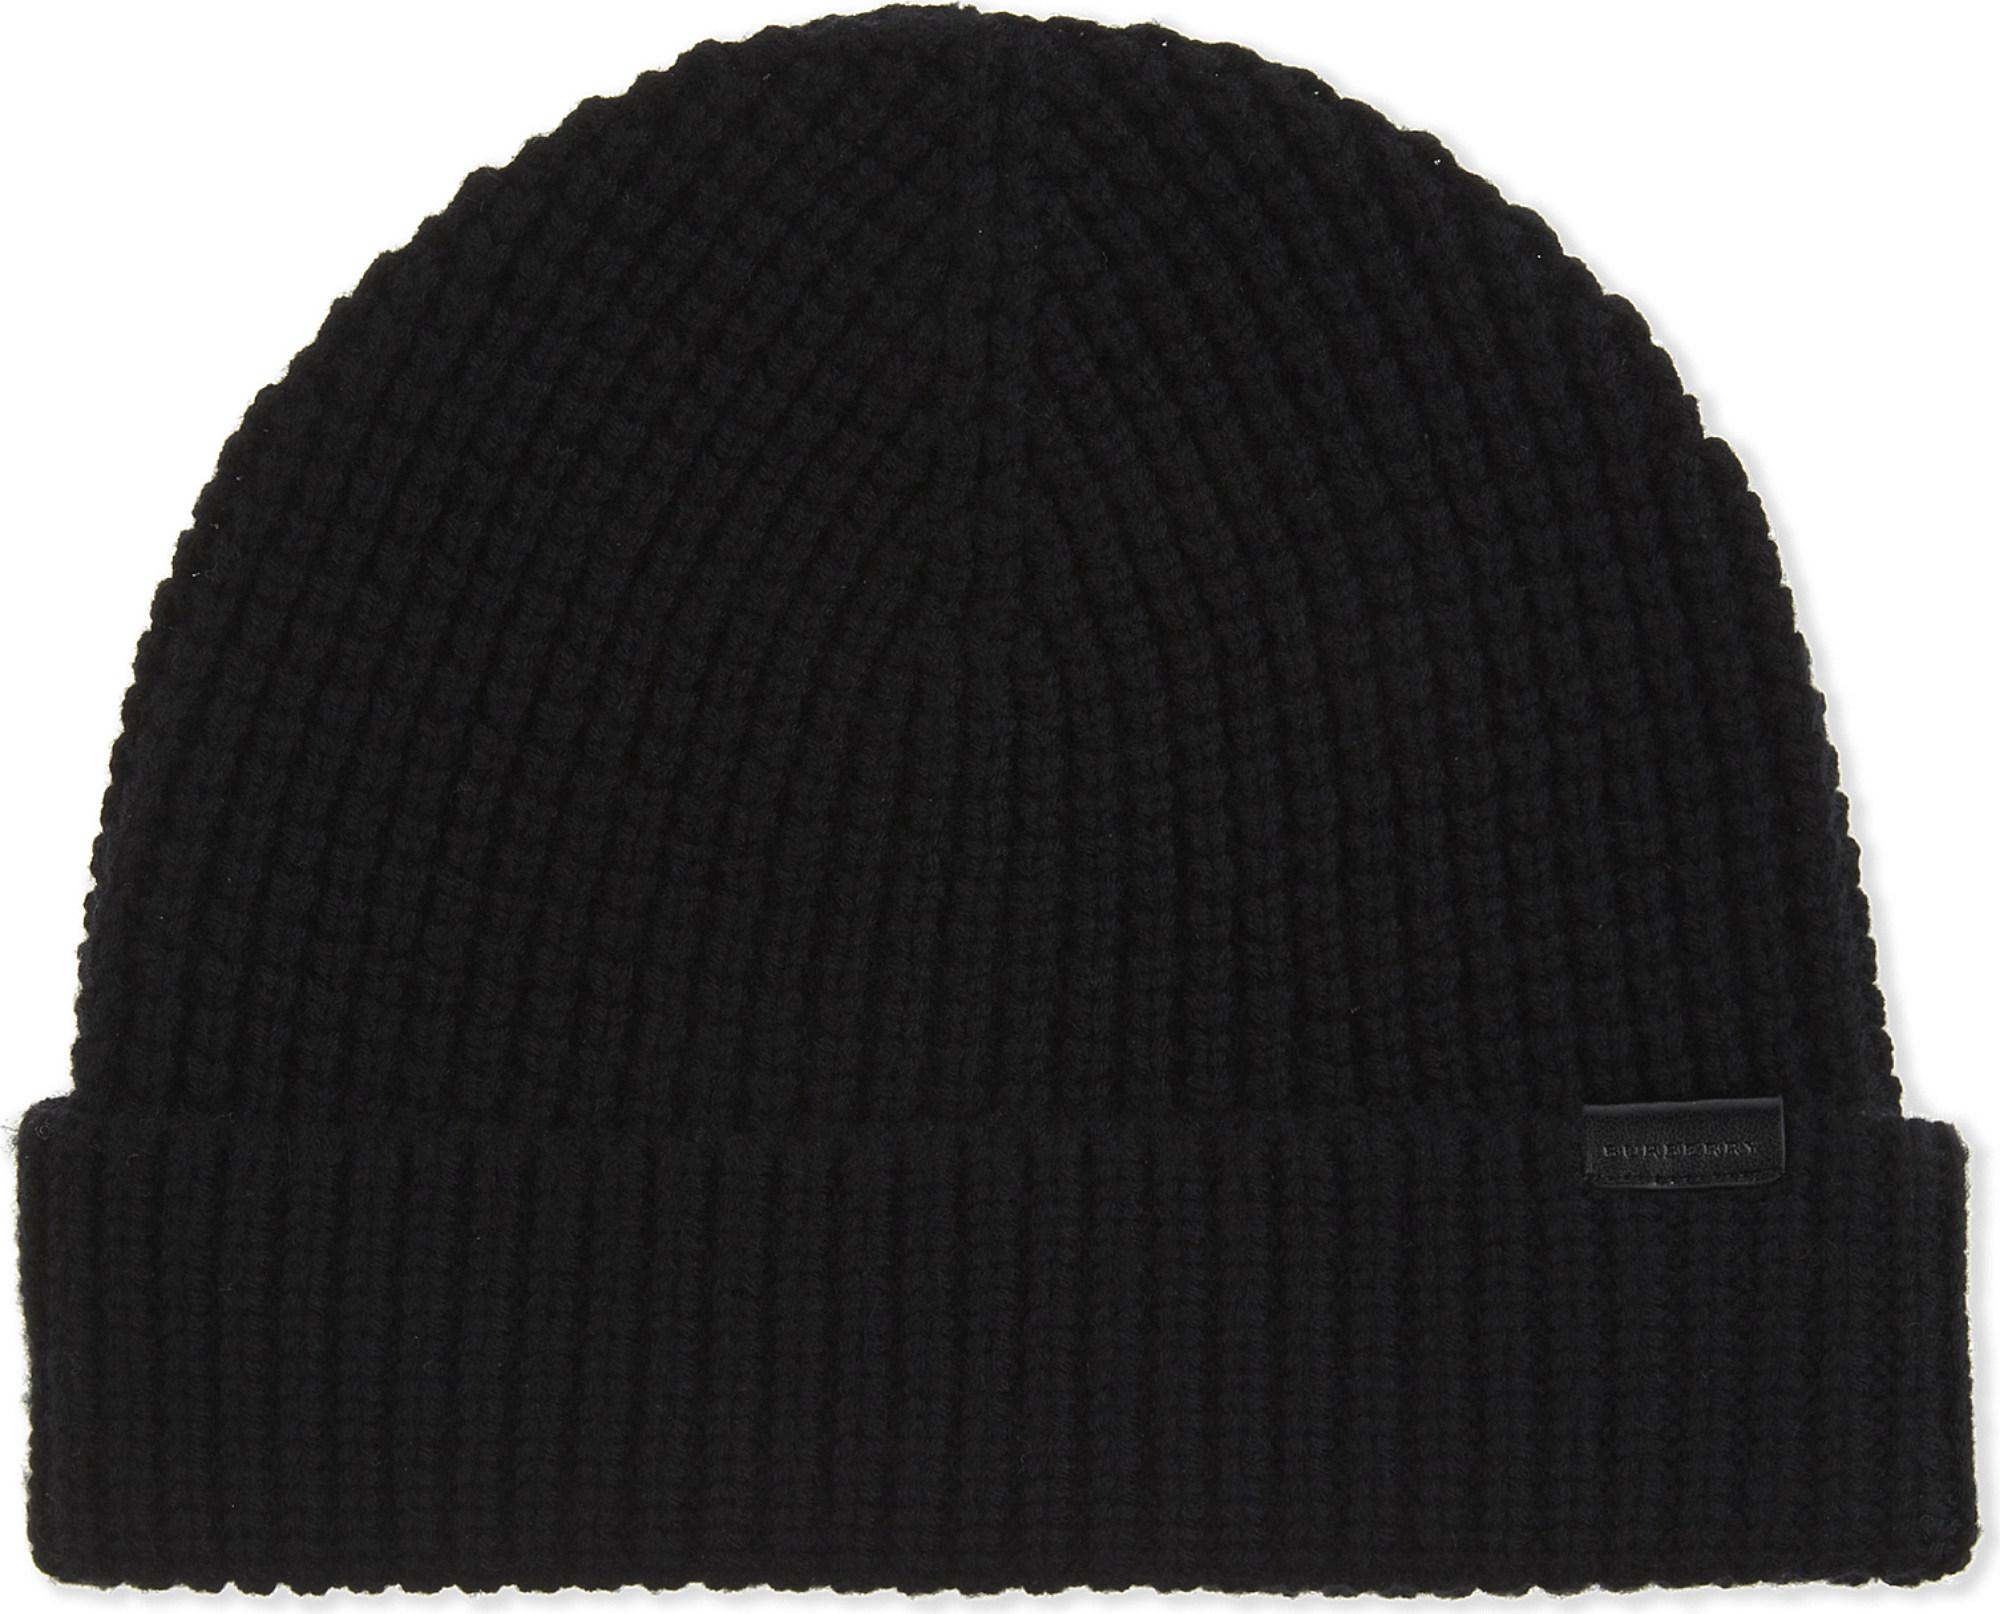 Burberry Wool Logo Tag Beanie Hat in Black for Men - Lyst